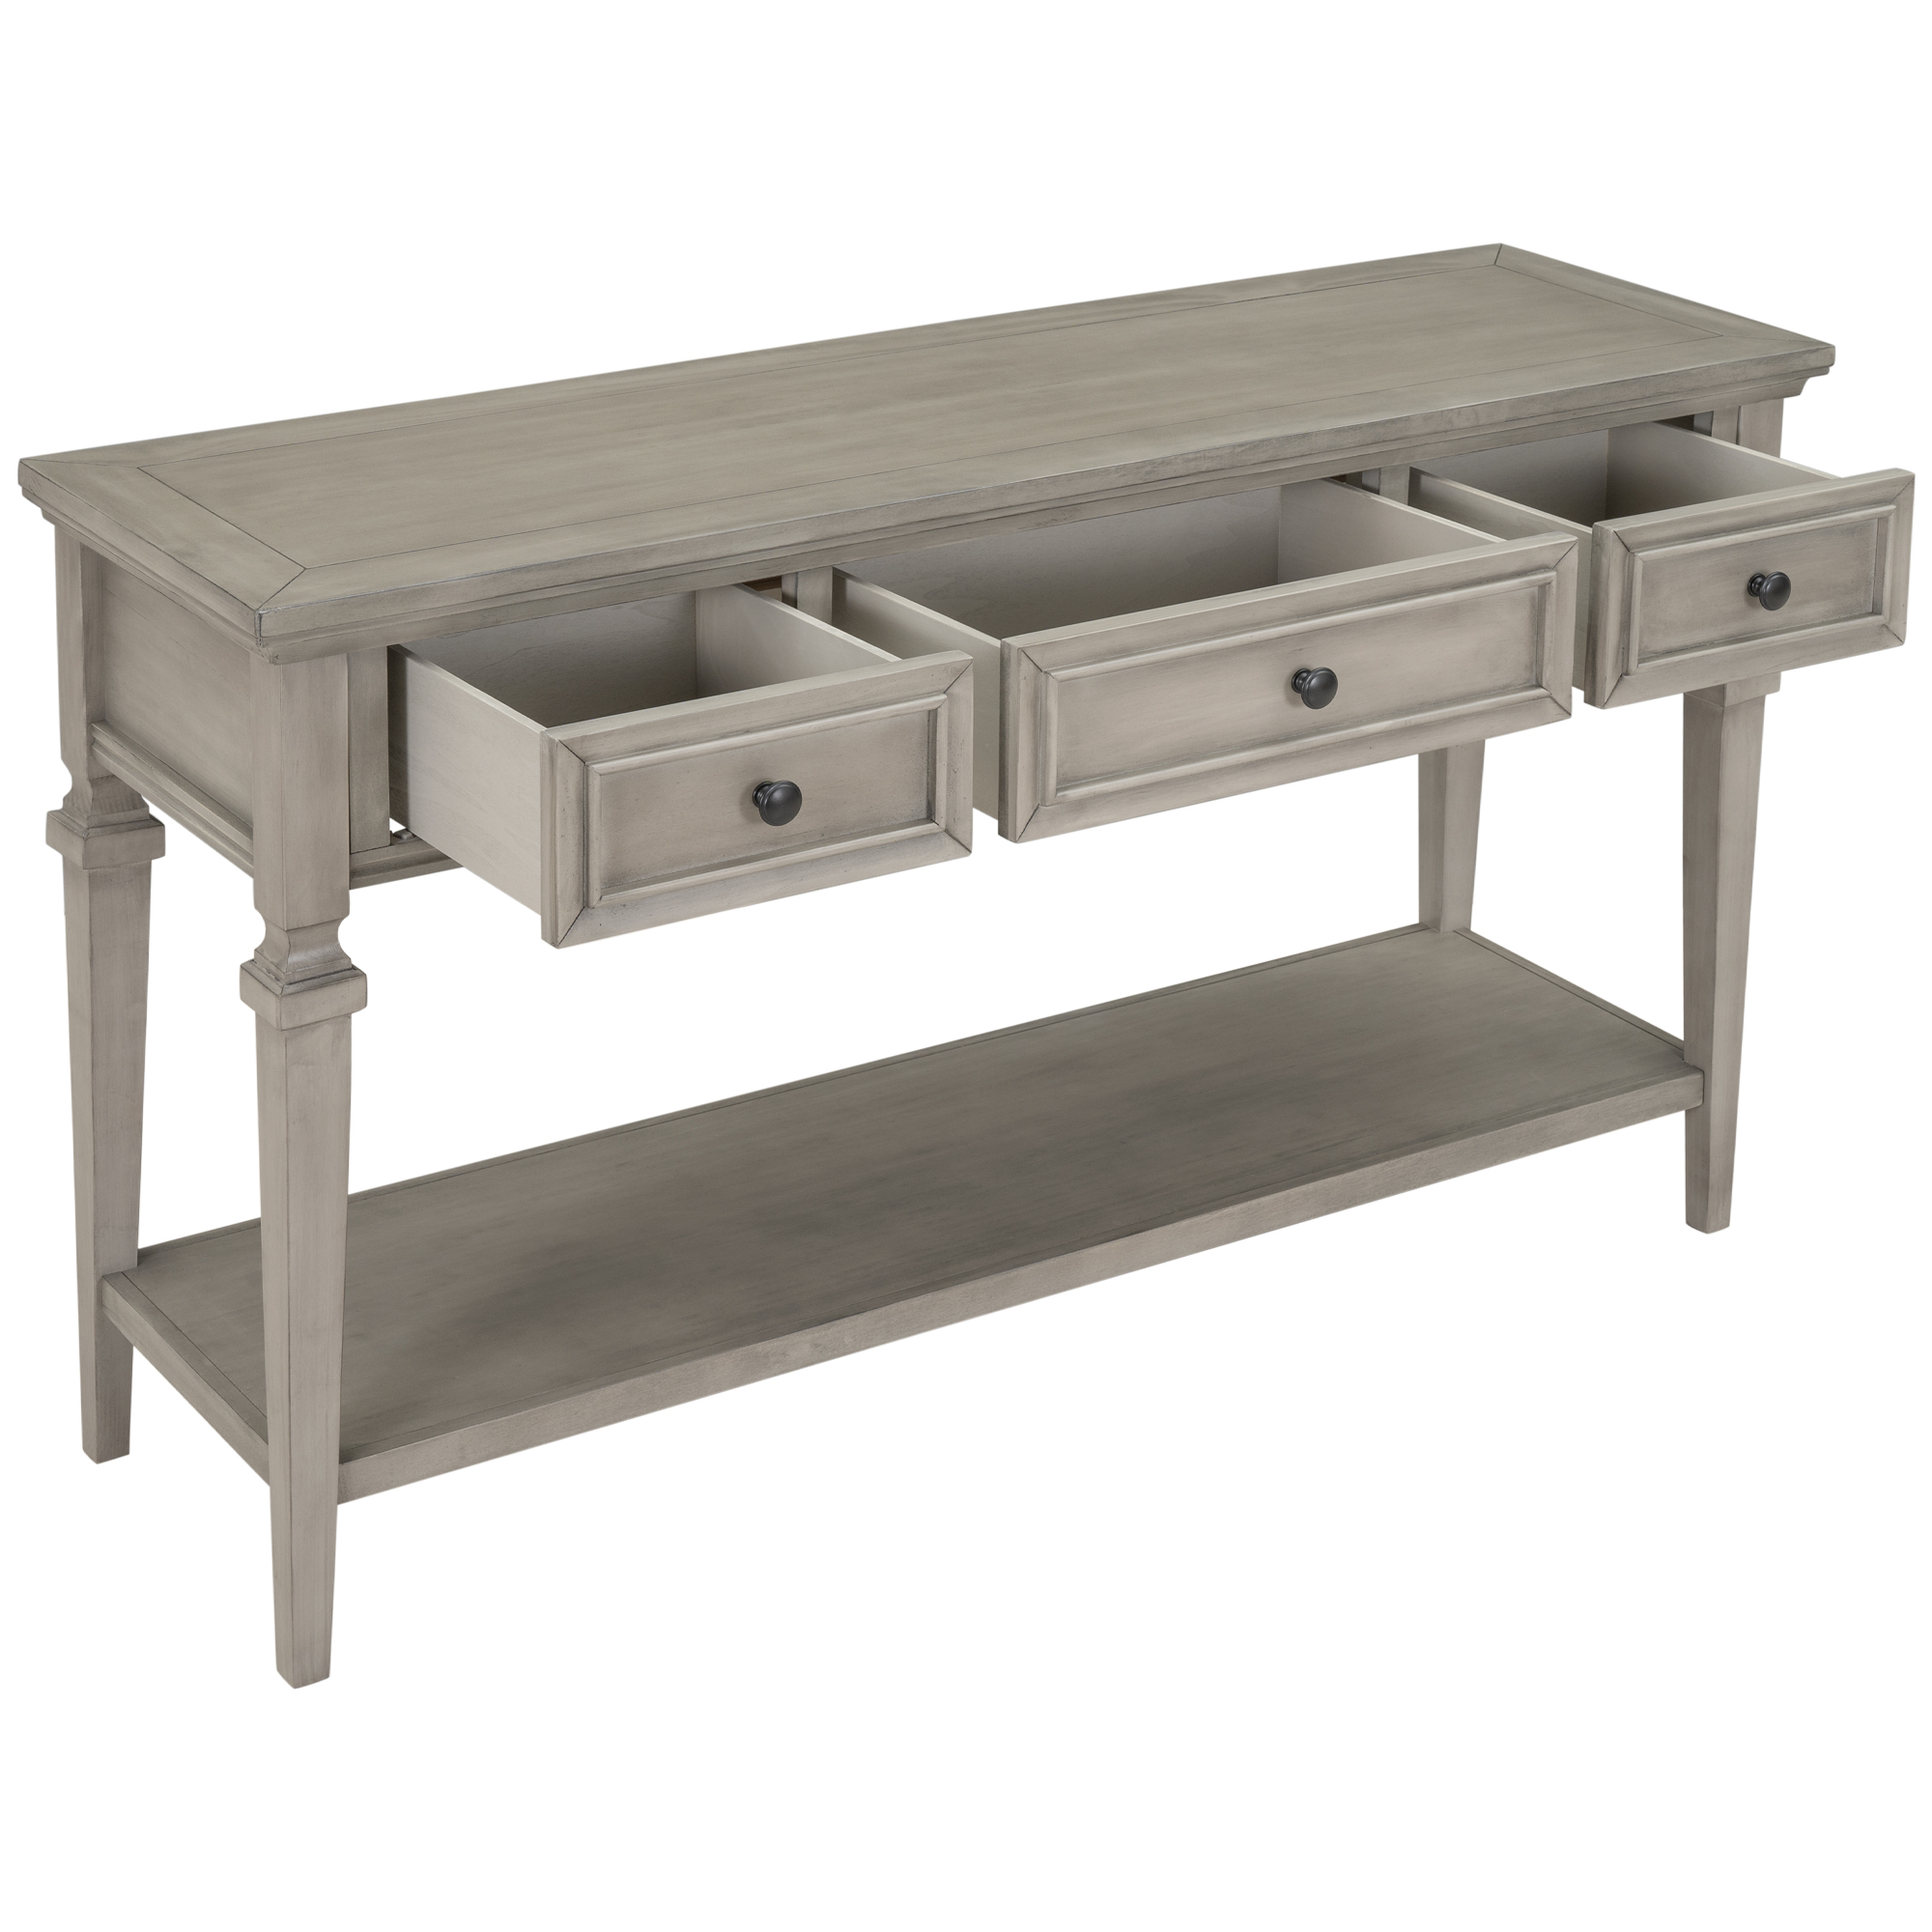 Classic Retro Style Console Table With Three Top Drawers And Bottom Shelf - WF199599AAE